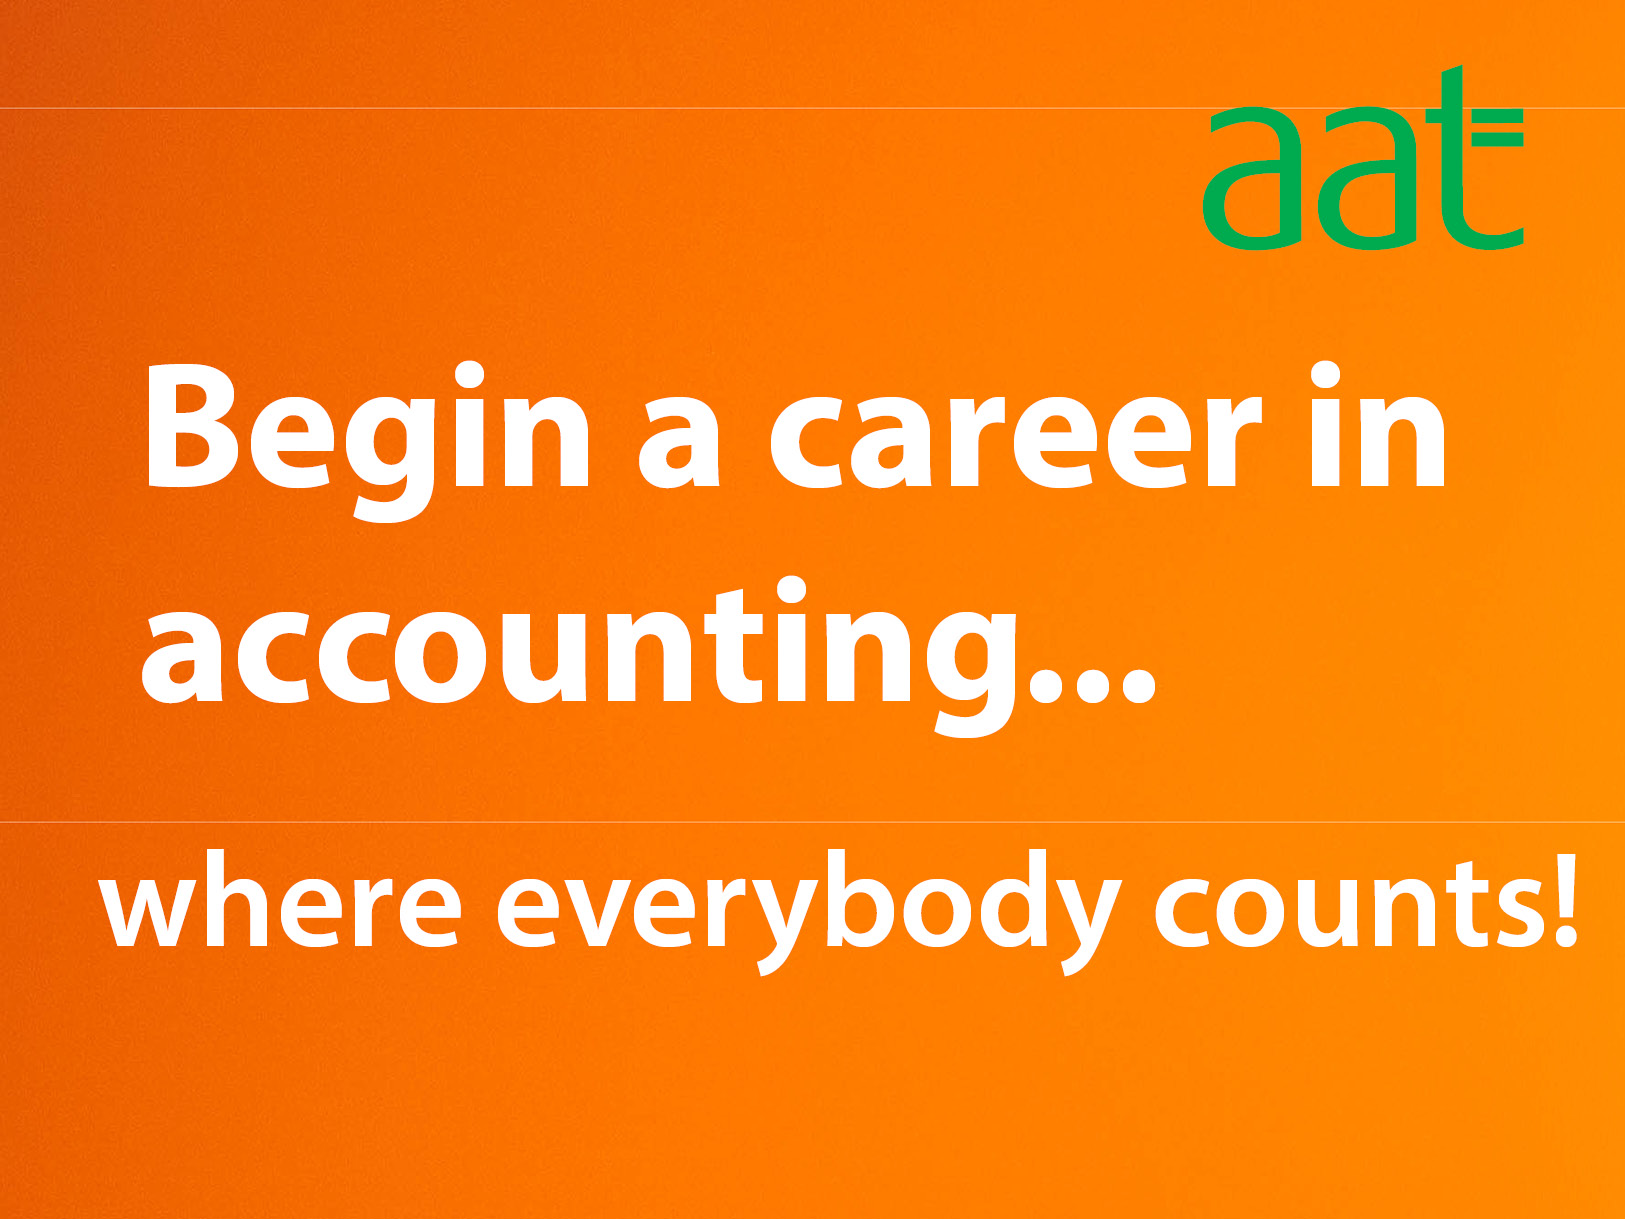 Begin a career in accounting... where everybody counts